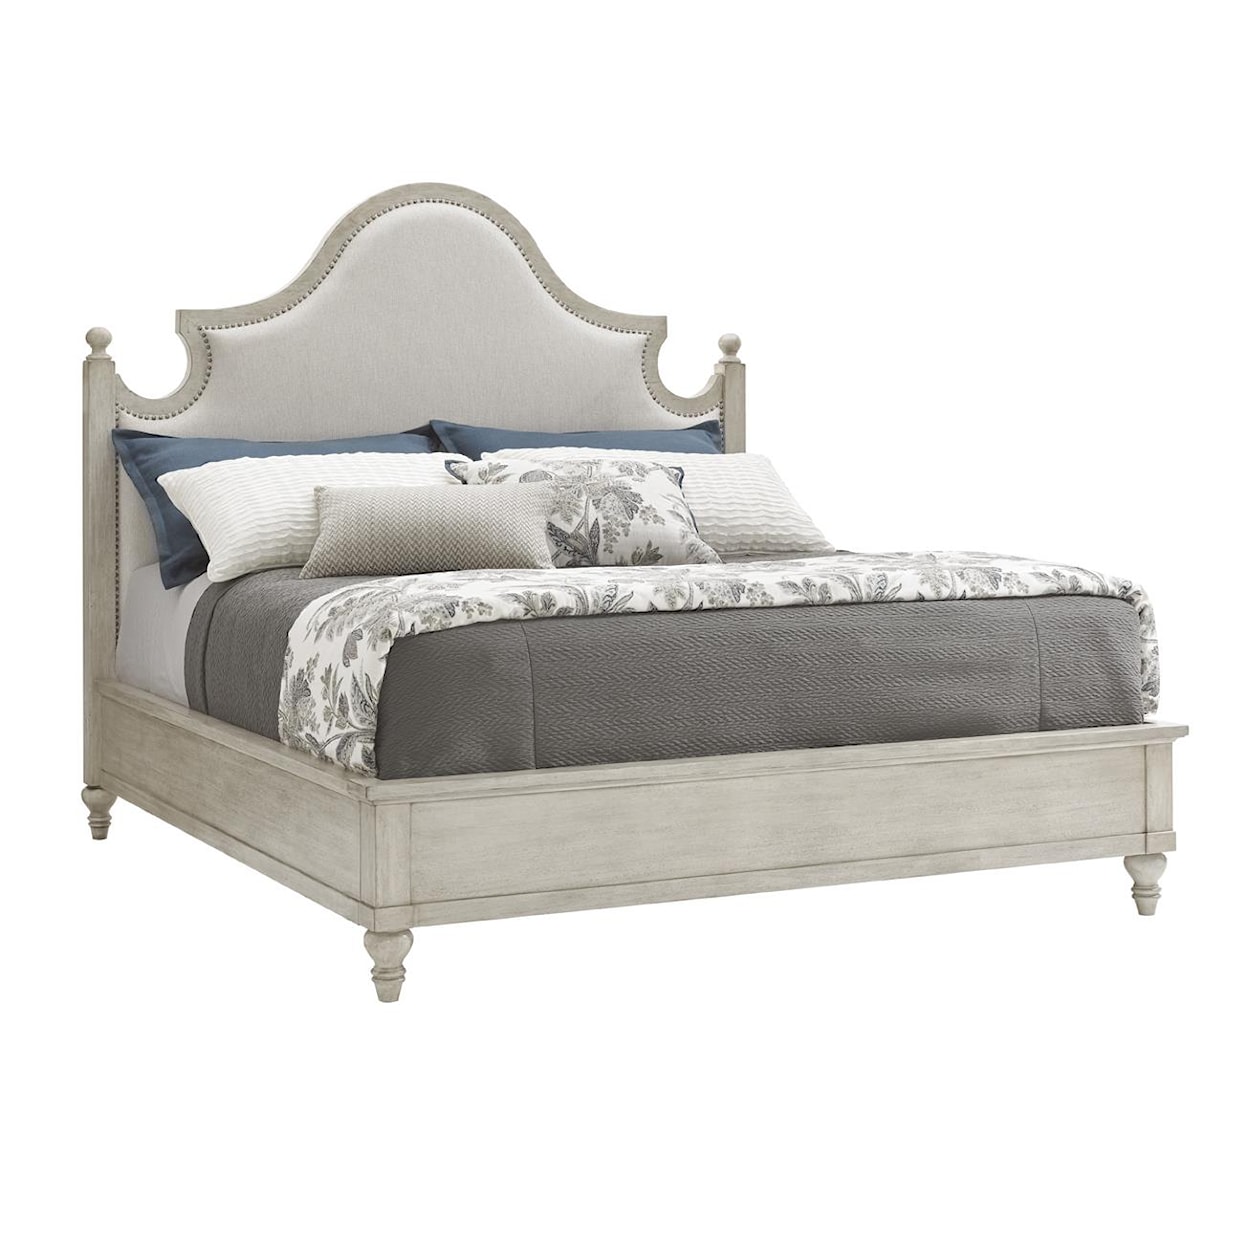 Lexington Oyster Bay ARBOR HILLS UPHOLSTERED BED, QUEEN